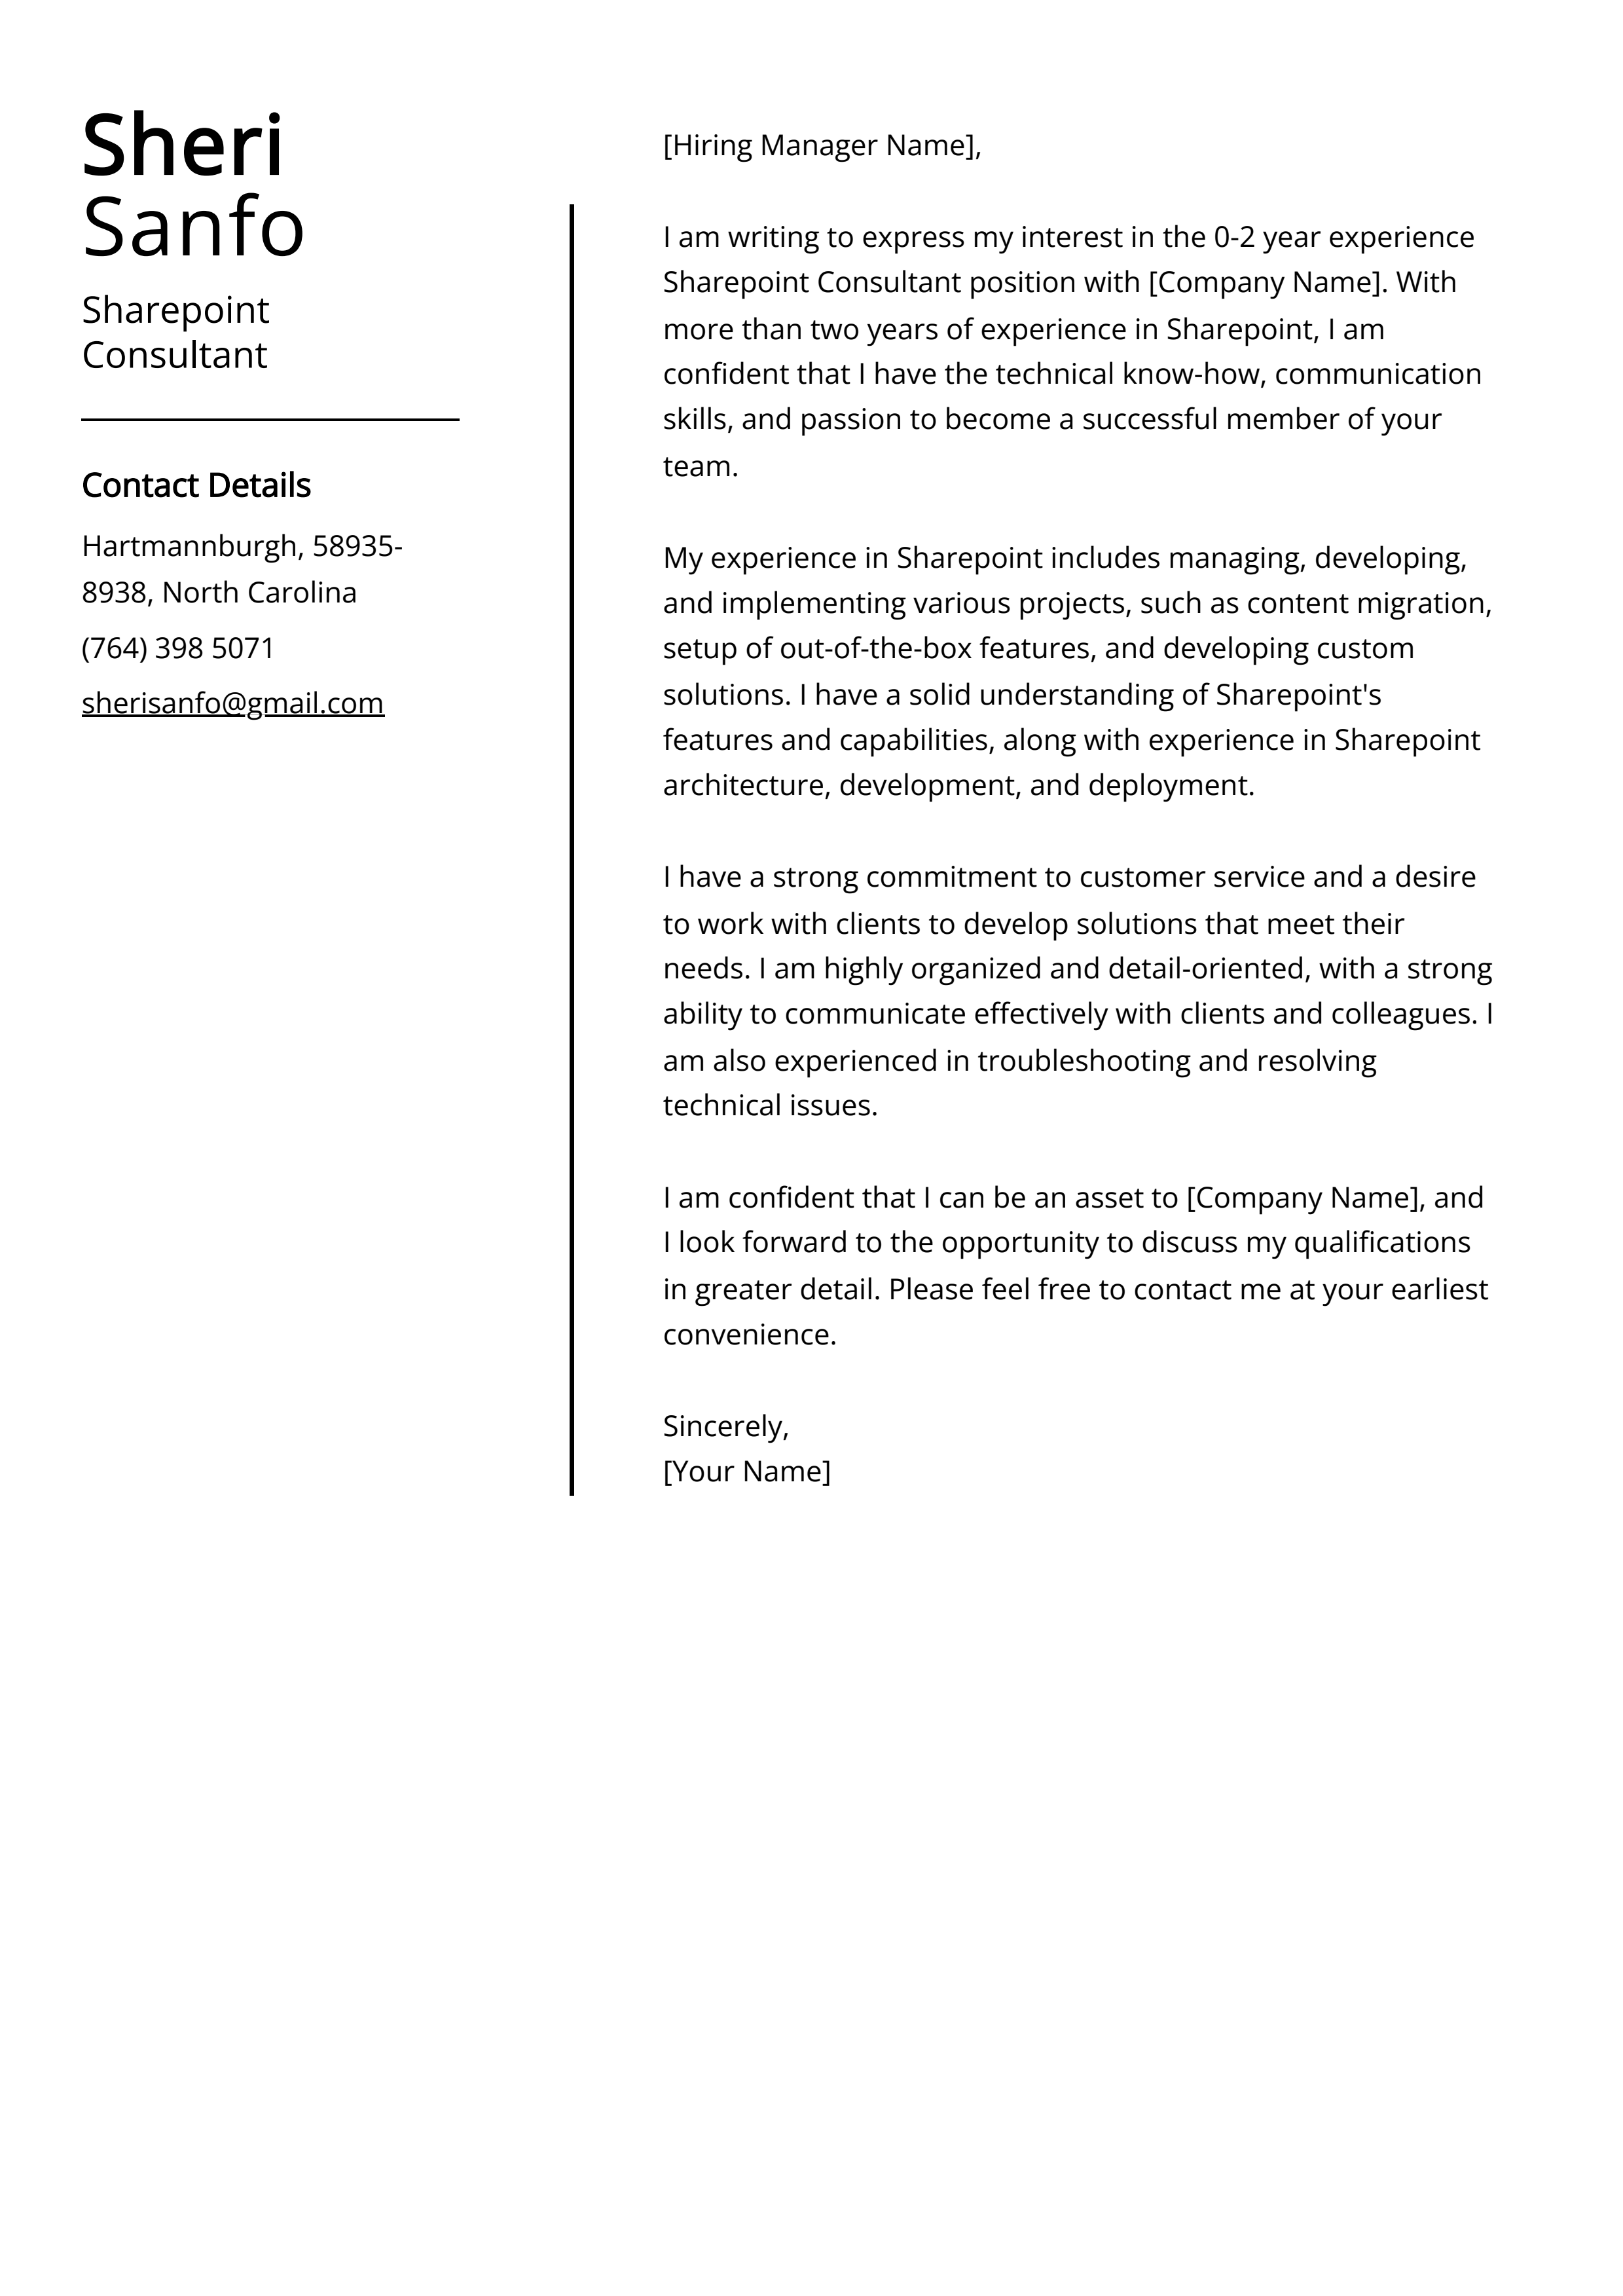 Sharepoint Consultant Cover Letter Example